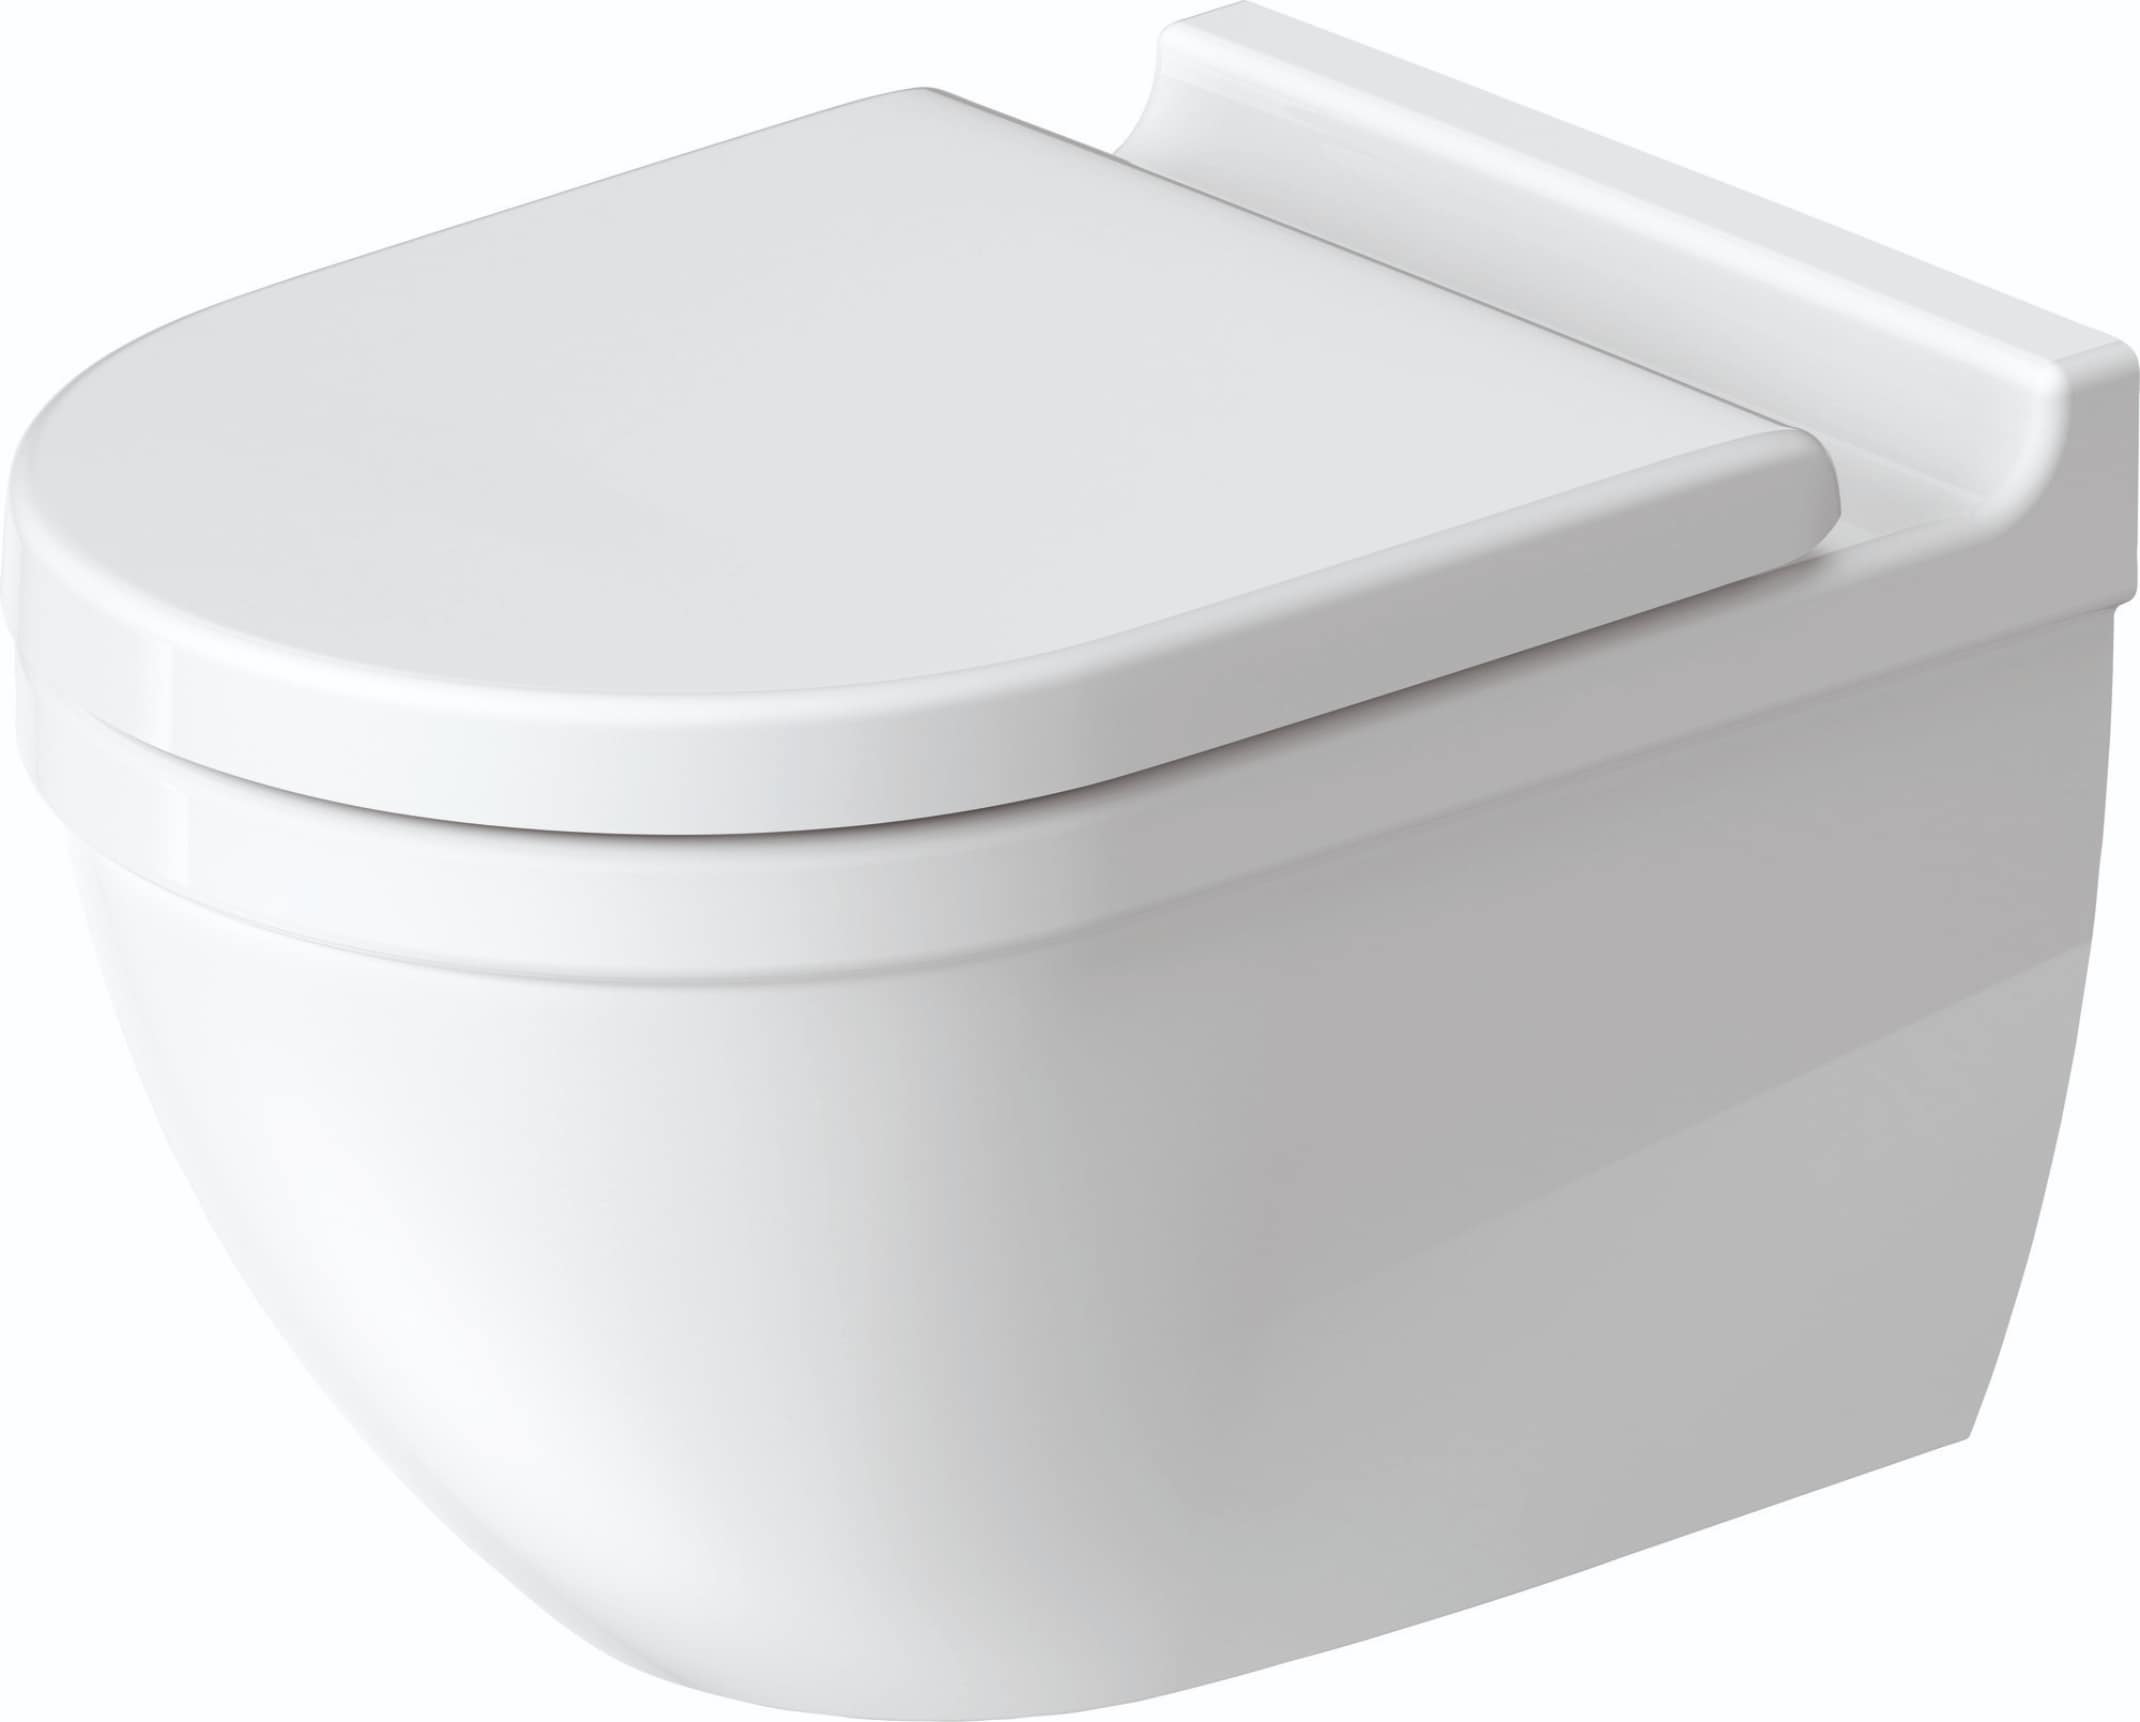 Surrey Zorg Symposium Duravit Starck 3 White Elongated Standard Height Toilet Bowl in the Toilet  Bowls department at Lowes.com